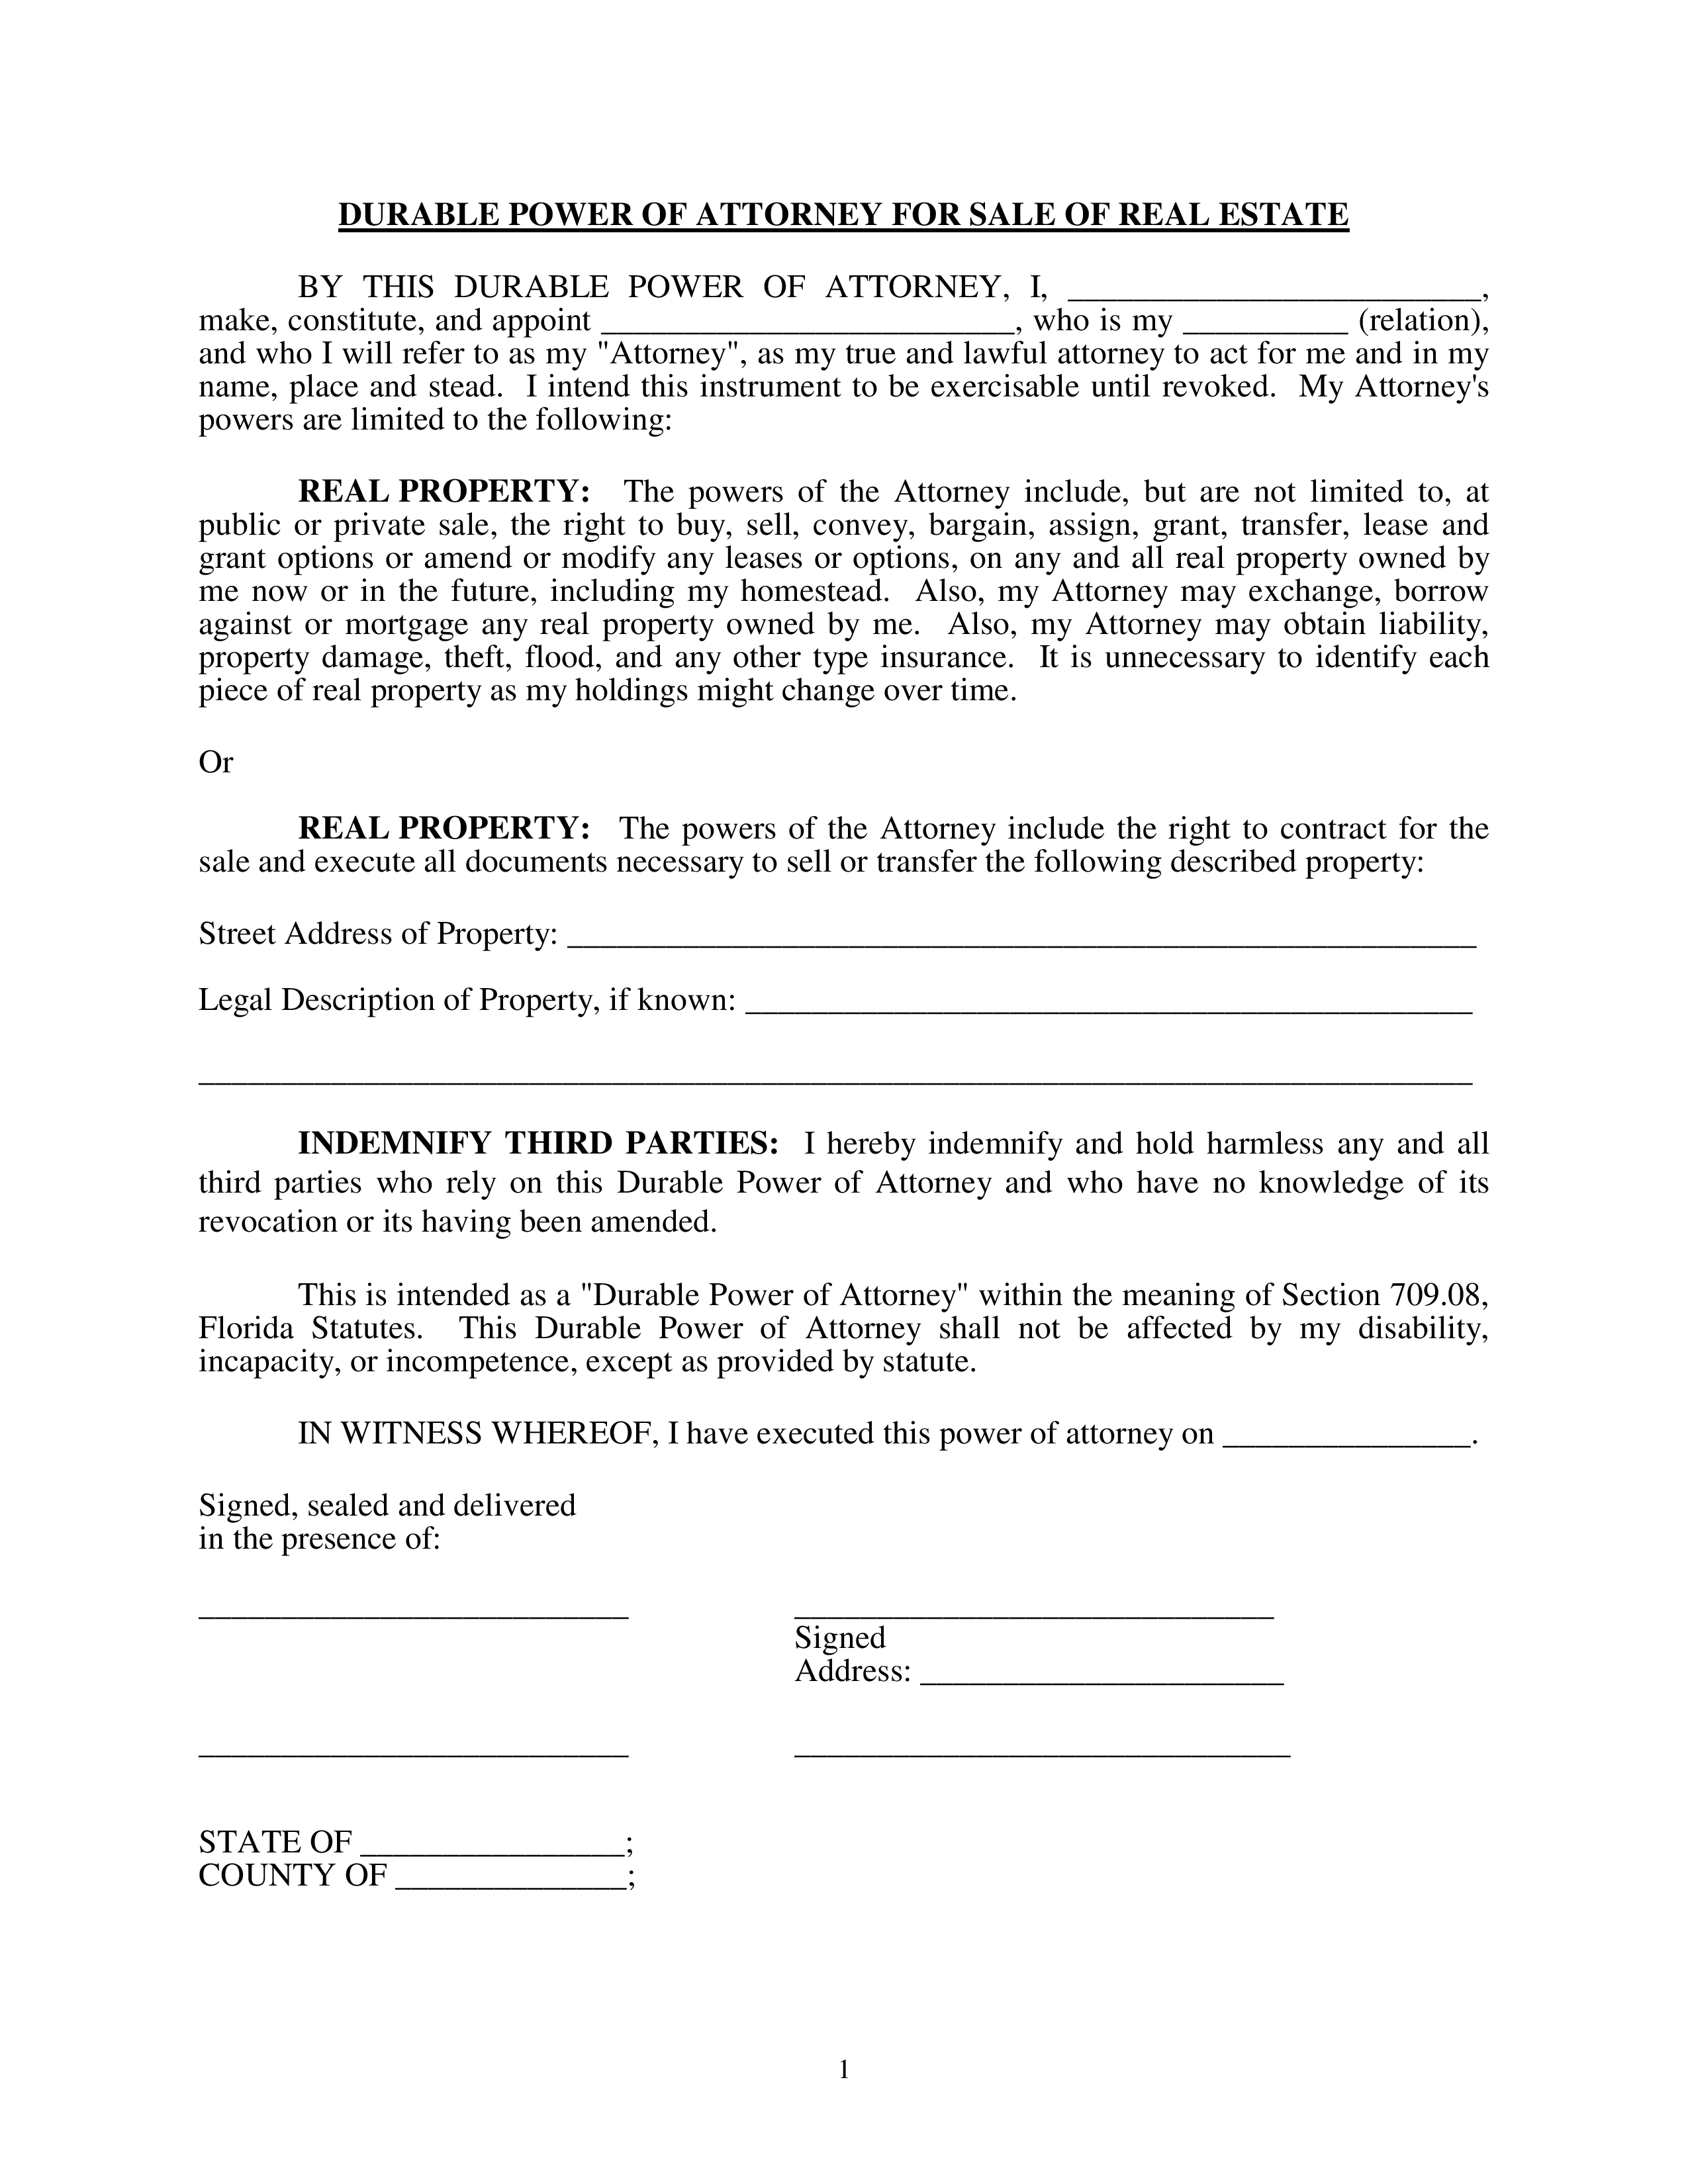 Florida Real Estate Only Power of Attorney Form